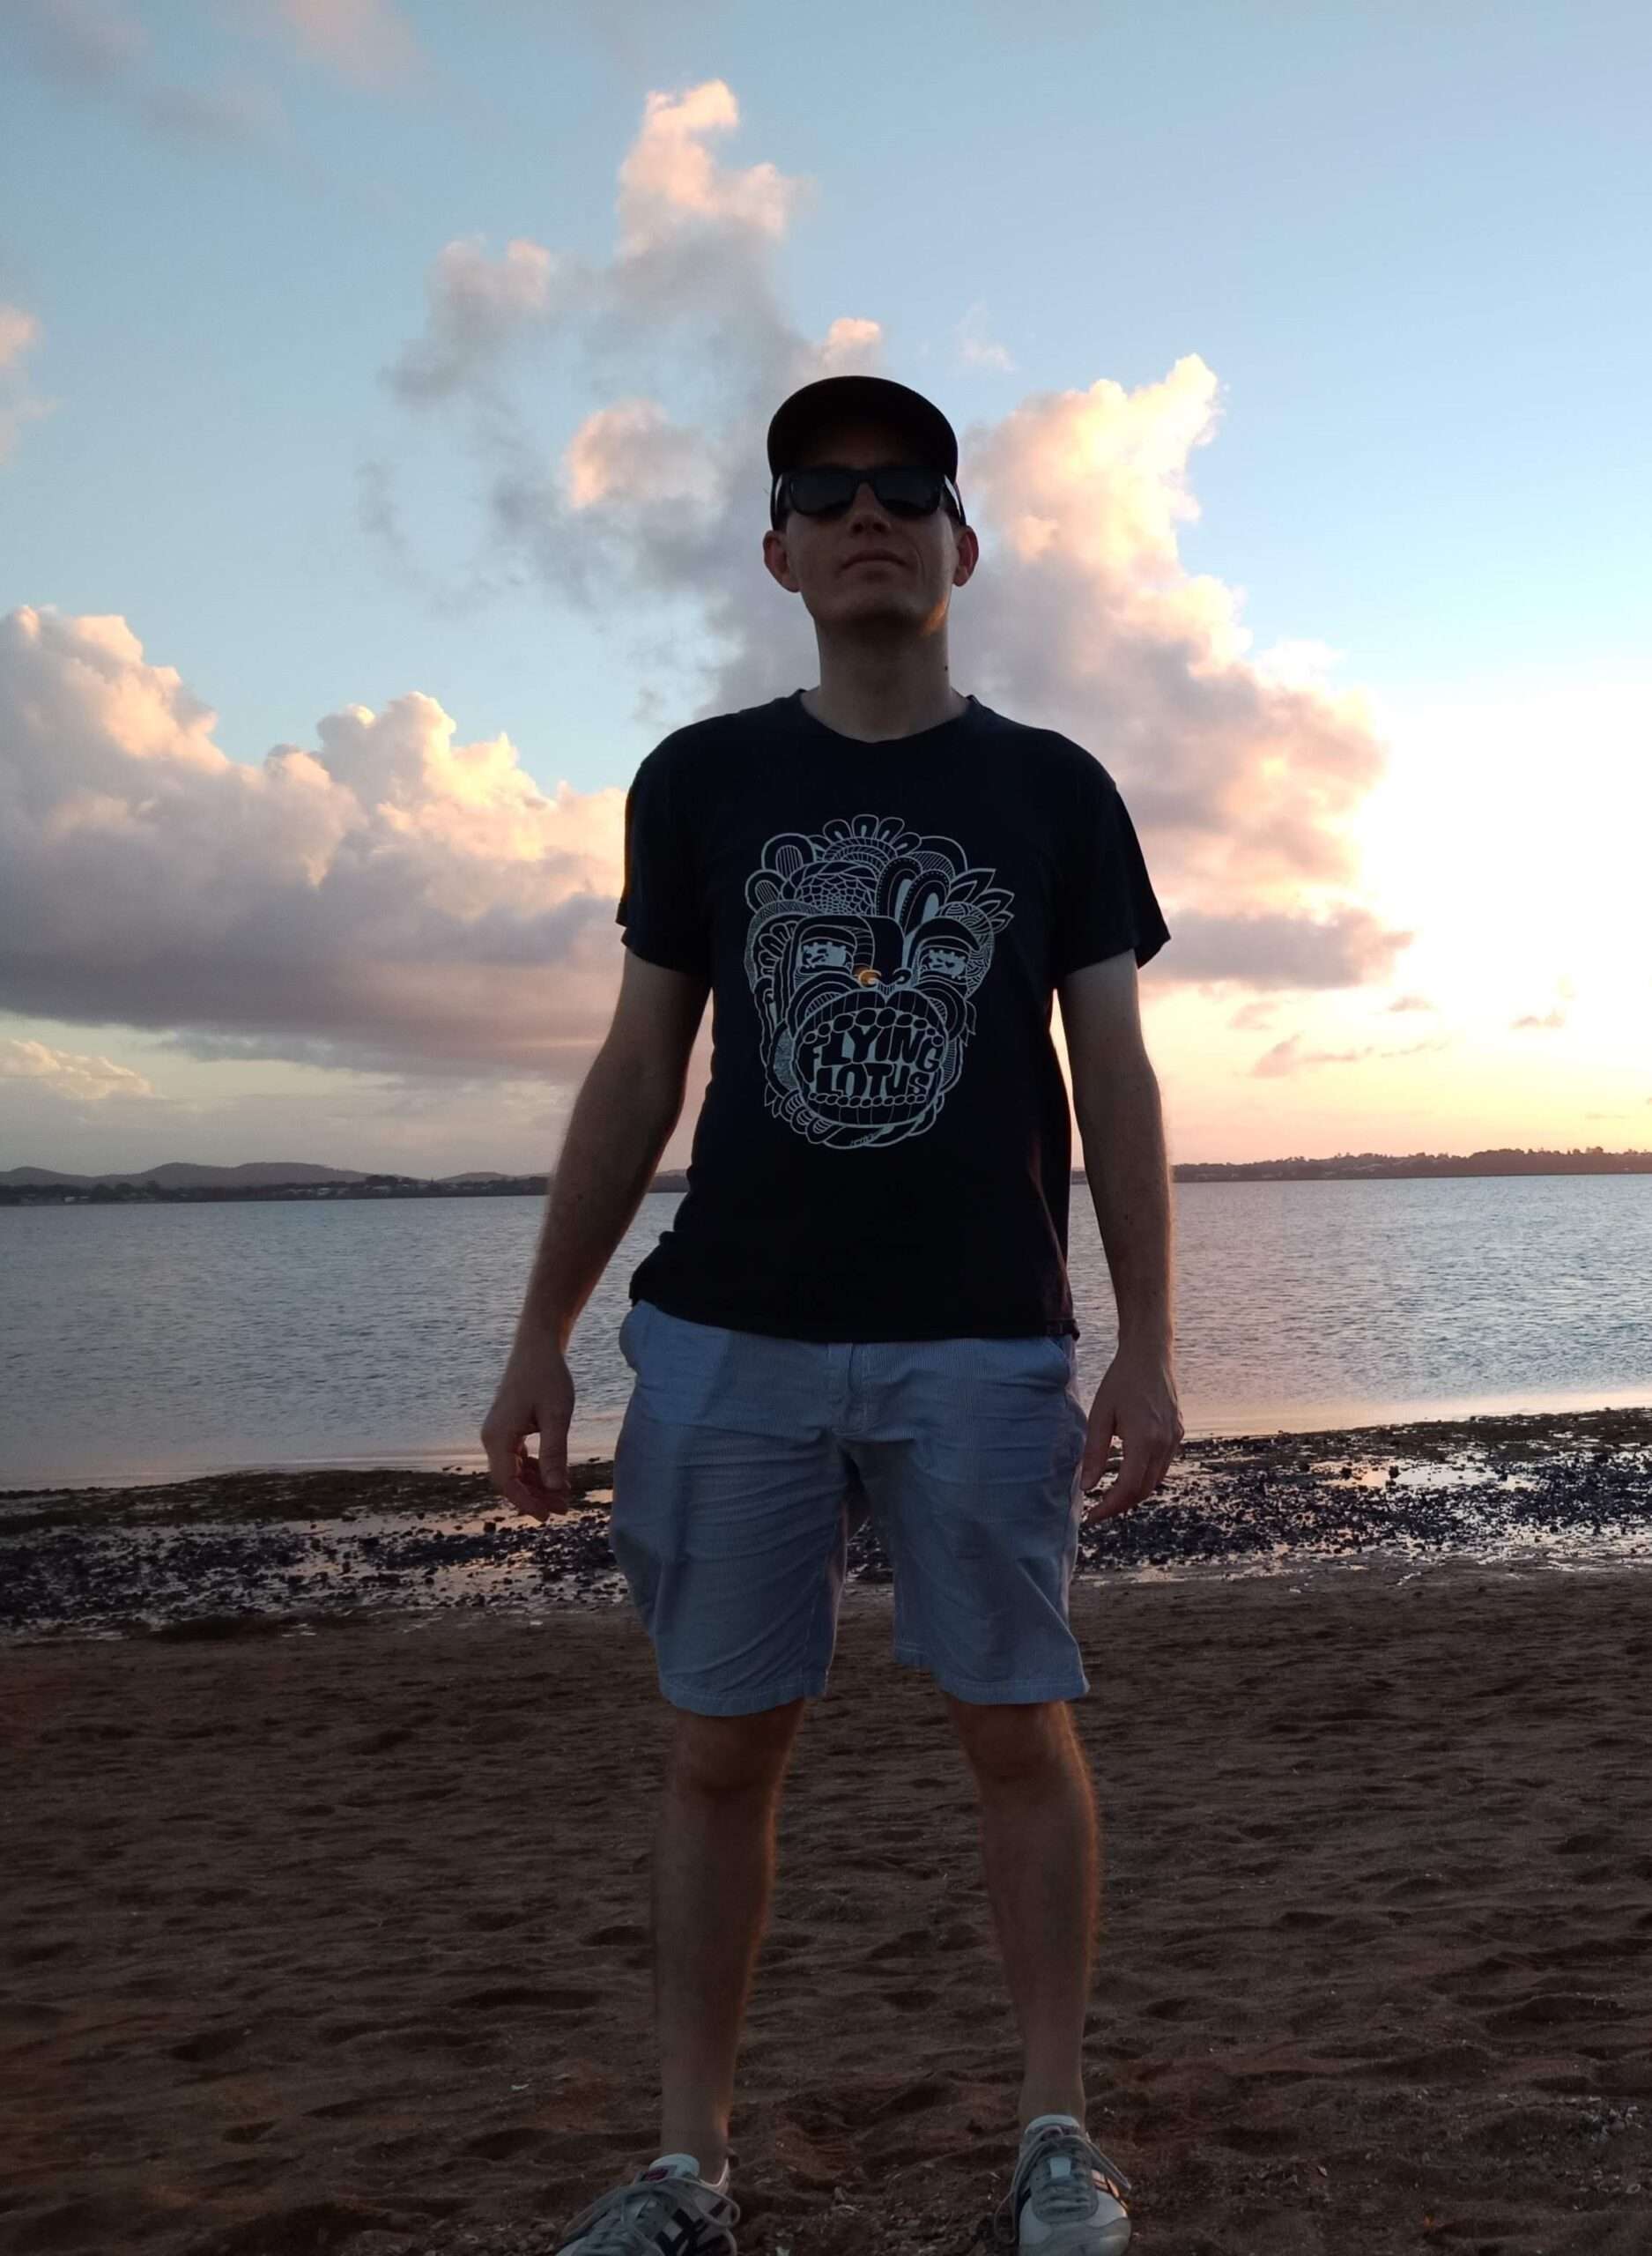 Me, looking towards the viewer, at a beach at sunset